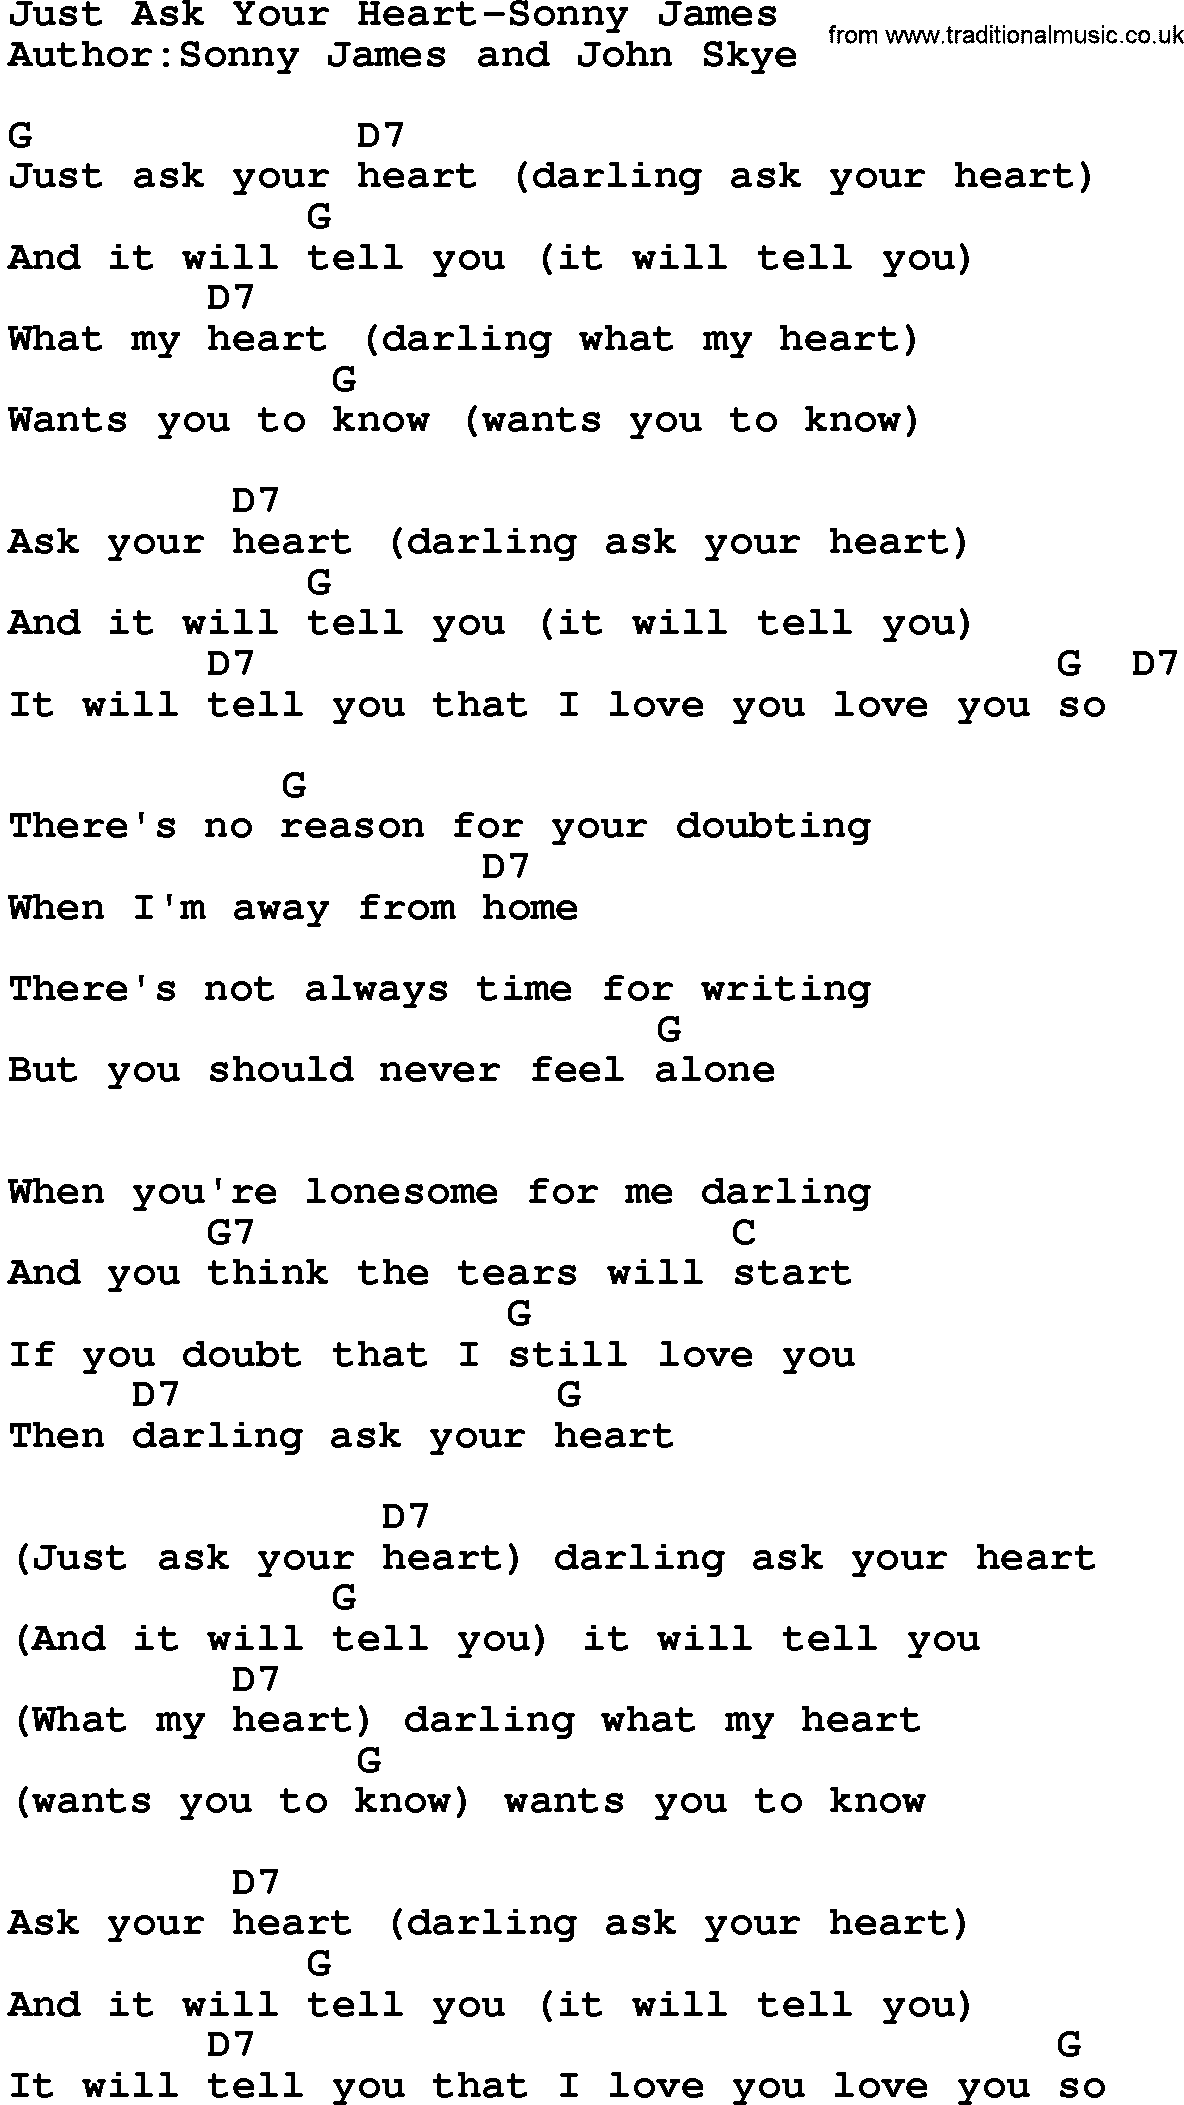 Country music song: Just Ask Your Heart-Sonny James lyrics and chords